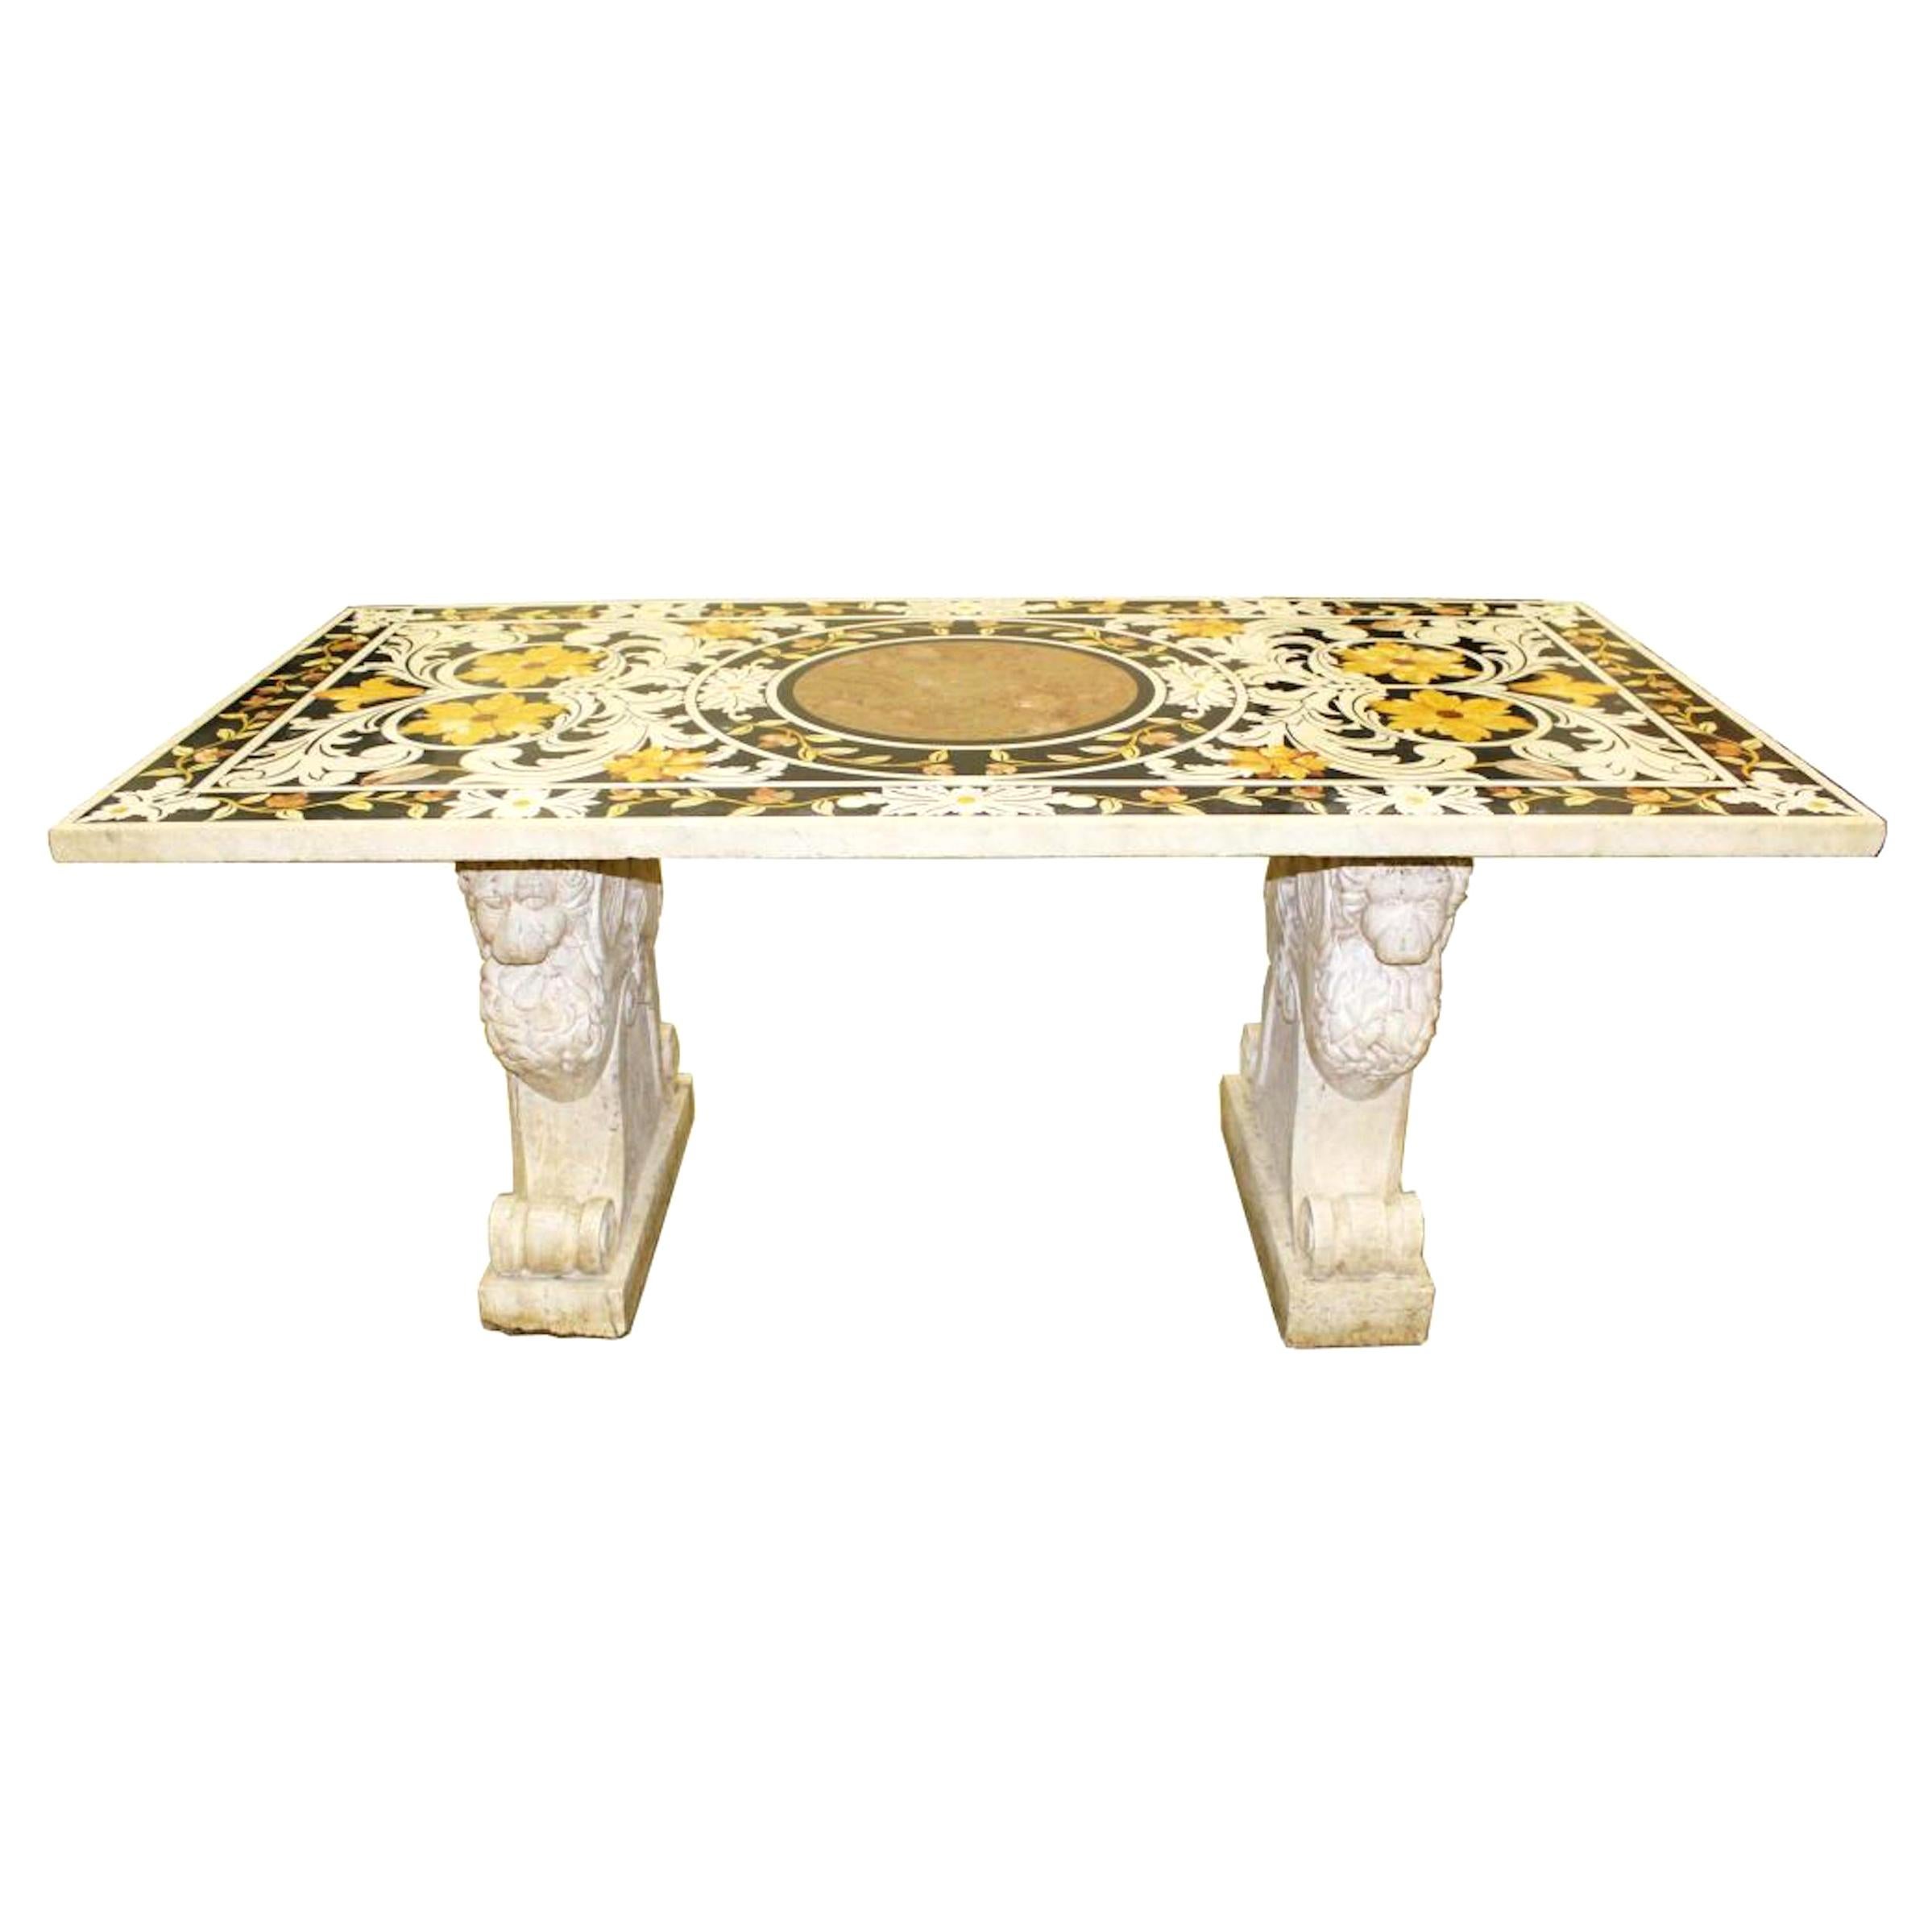 18th Century Italian Pietra Dura Marble-Top Table For Sale